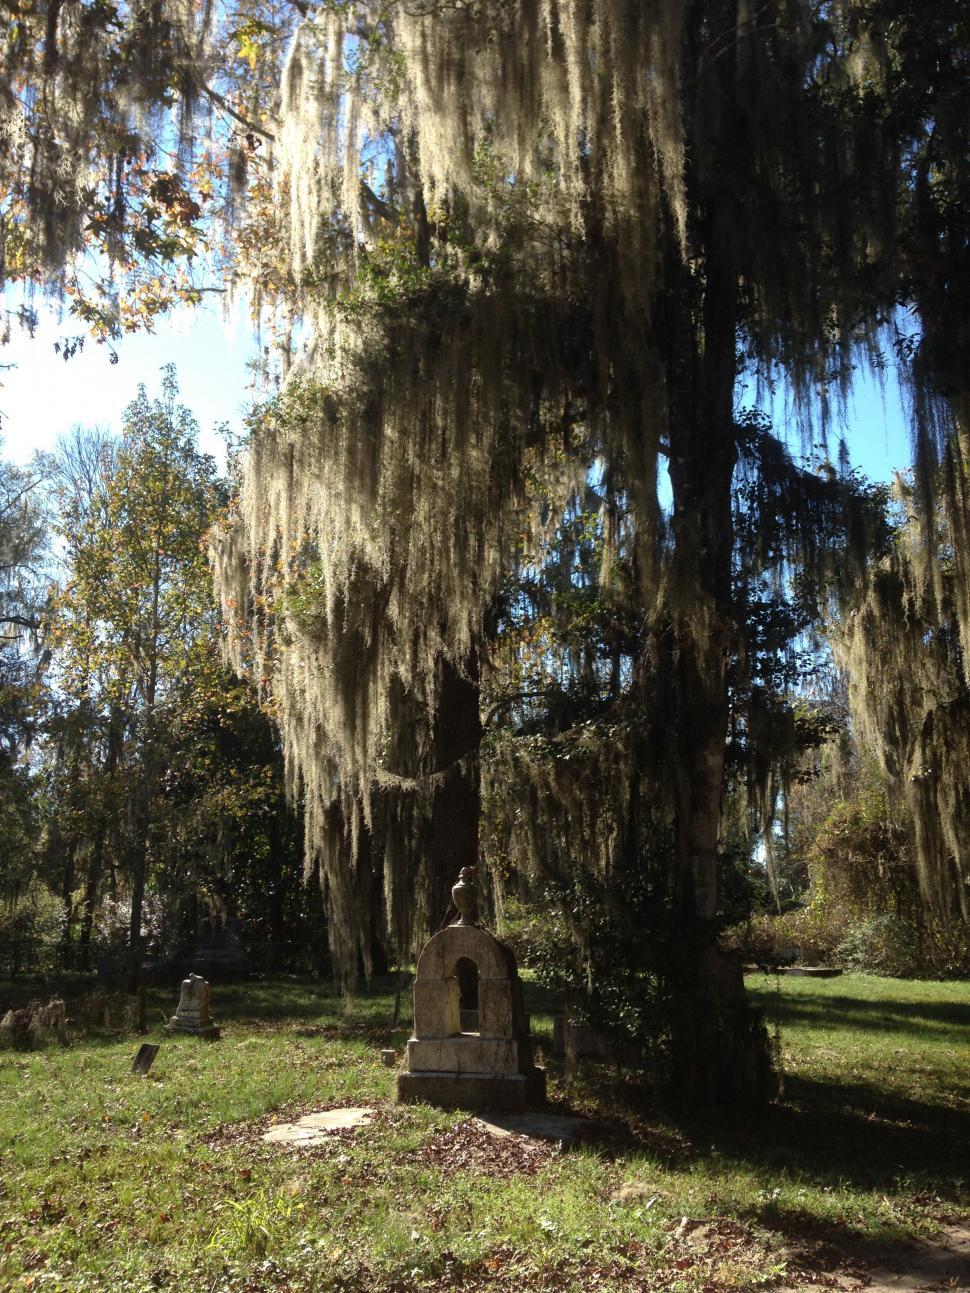 Free Image of Southern Cemetery and Trees 